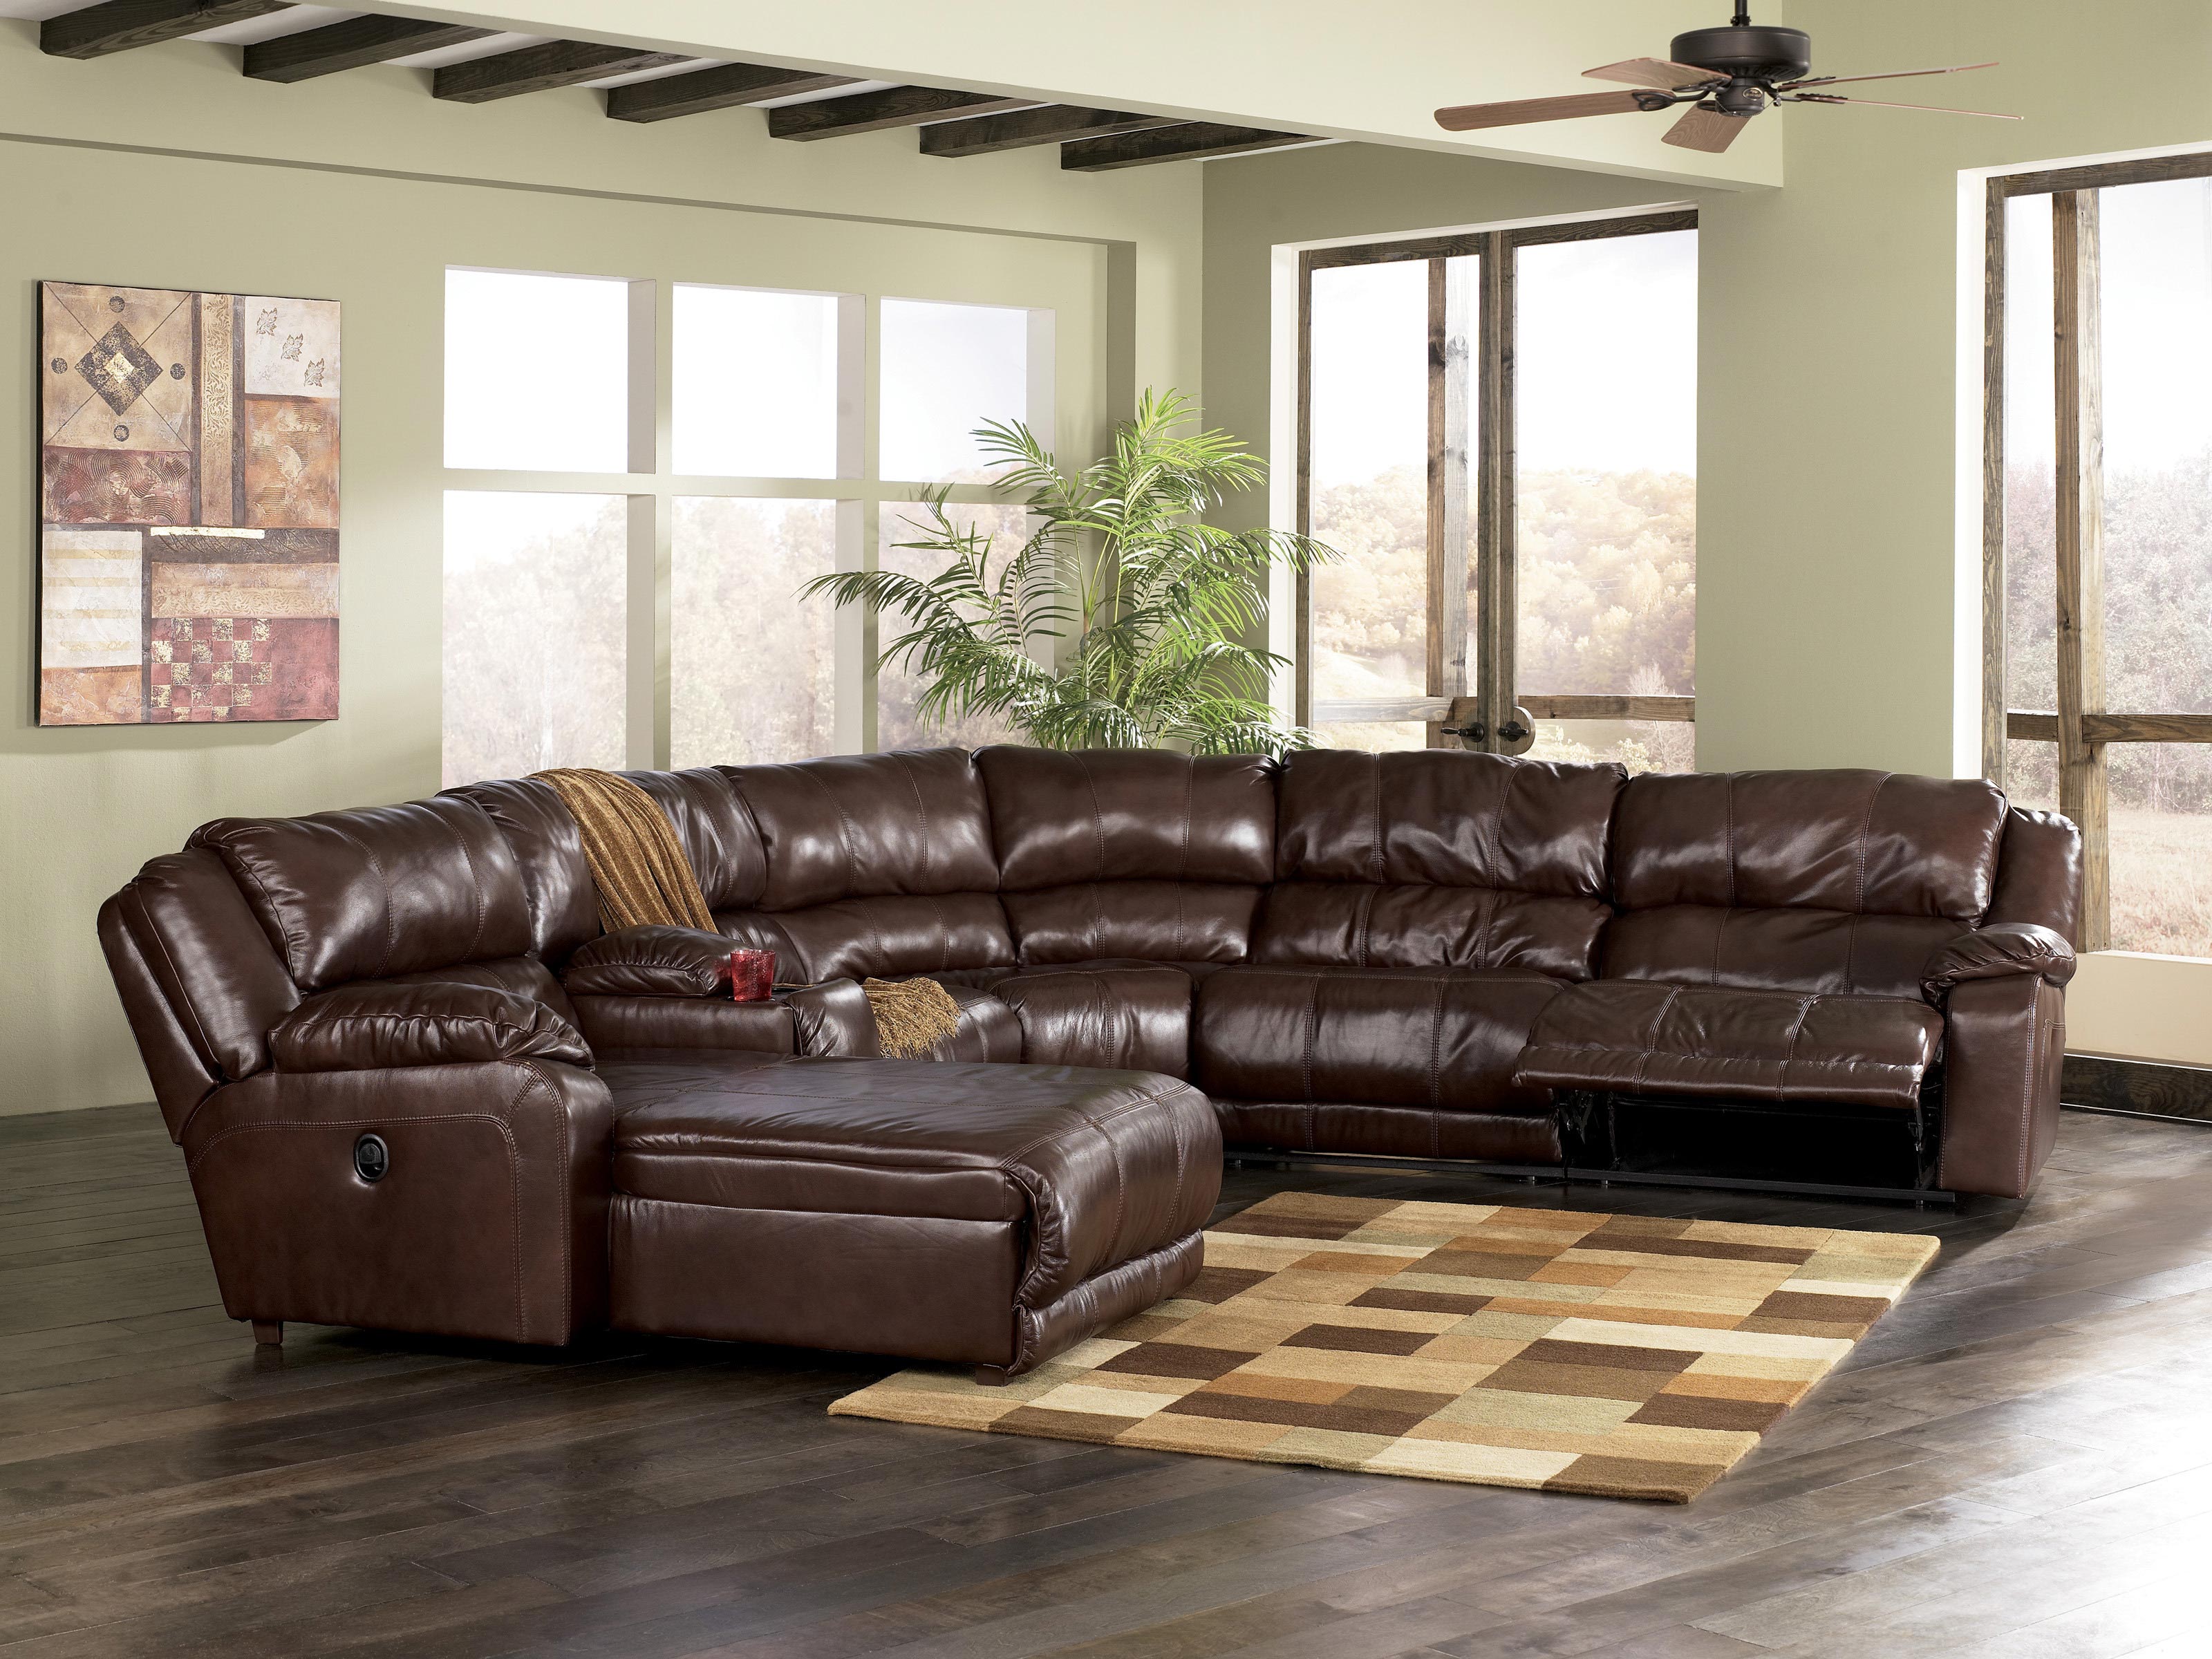 elegant living room ideas decorating with black leather sectionals sofa with loveseat